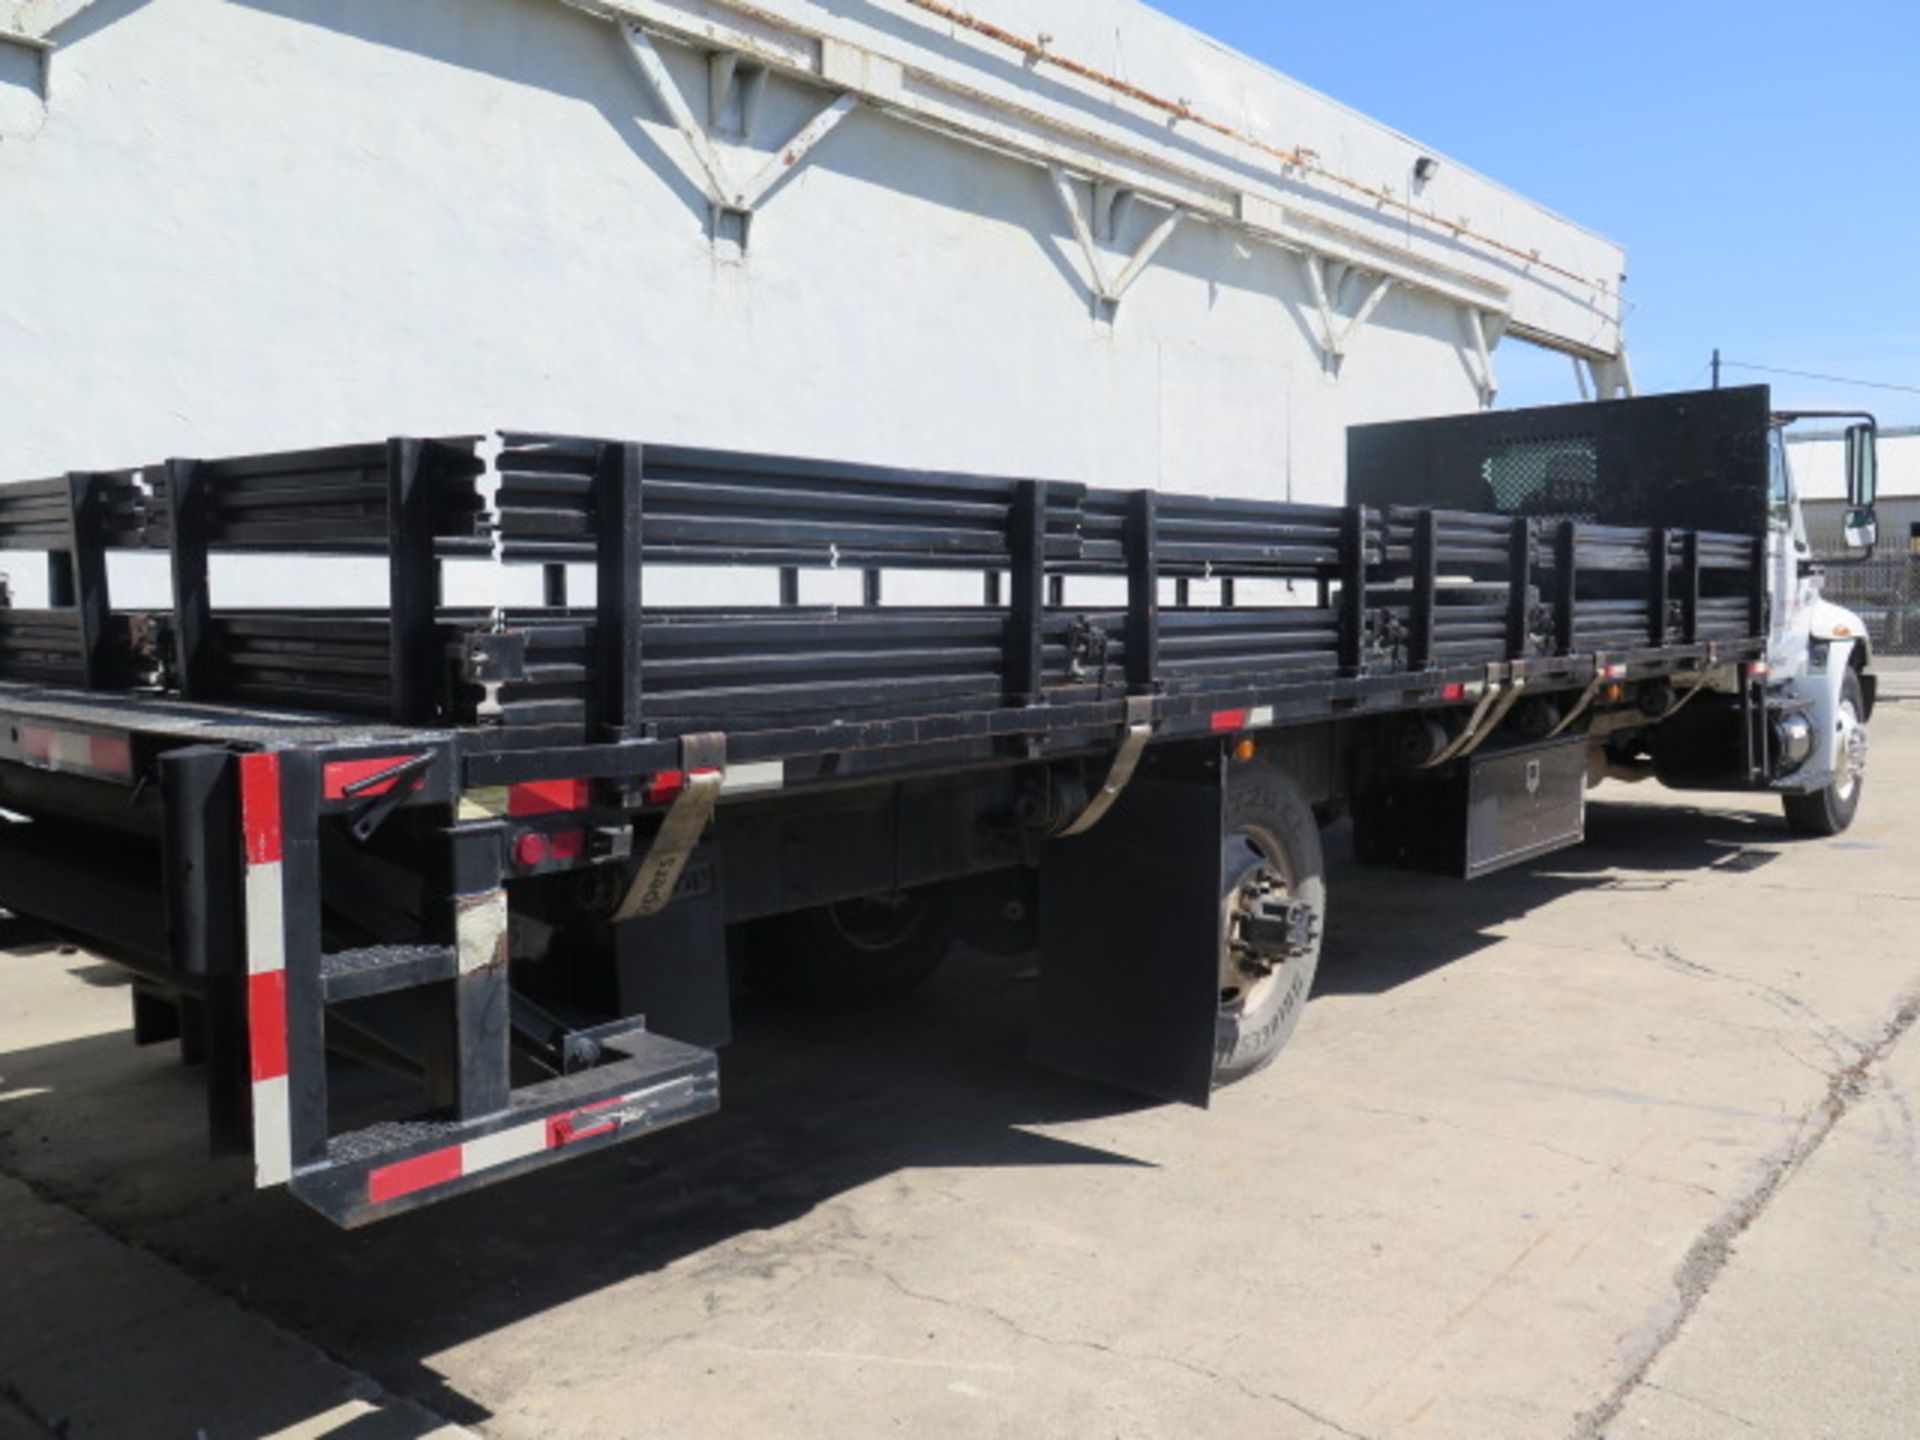 2005 International 4300 DT466 24’ Stake Bed Lisc# 19920K1 w/ Diesel, Auto,NOT FOR CA USE, SOLD AS IS - Image 4 of 34